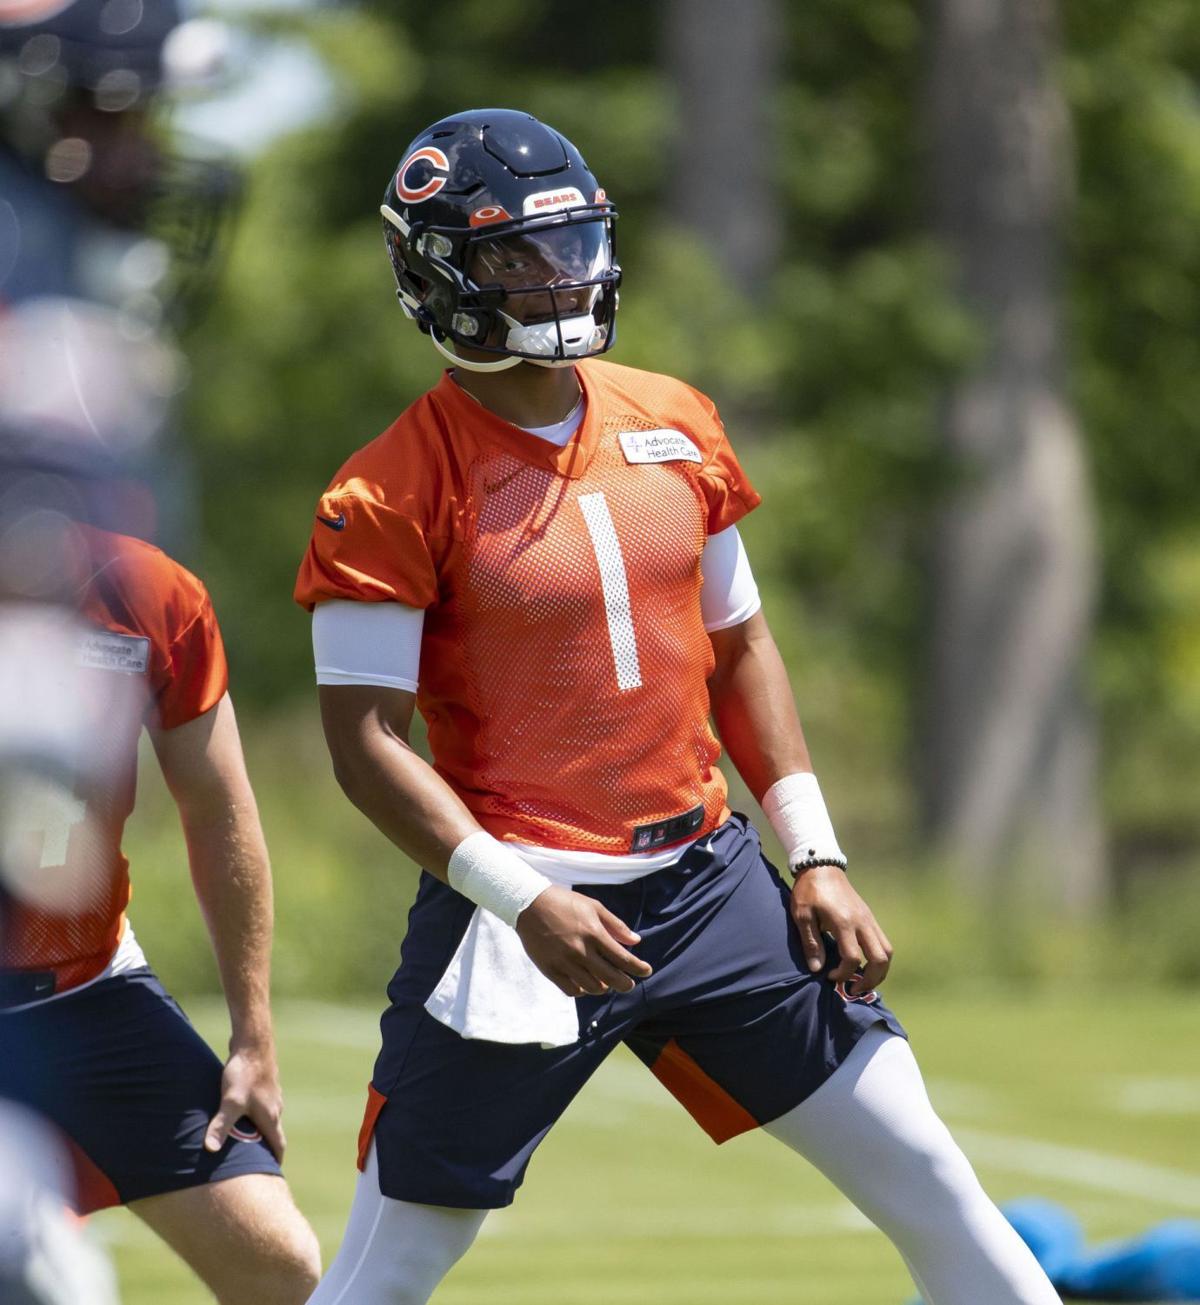 Why Chicago Bears' Jay Cutler Isn't a Good Quarterback – Rolling Stone